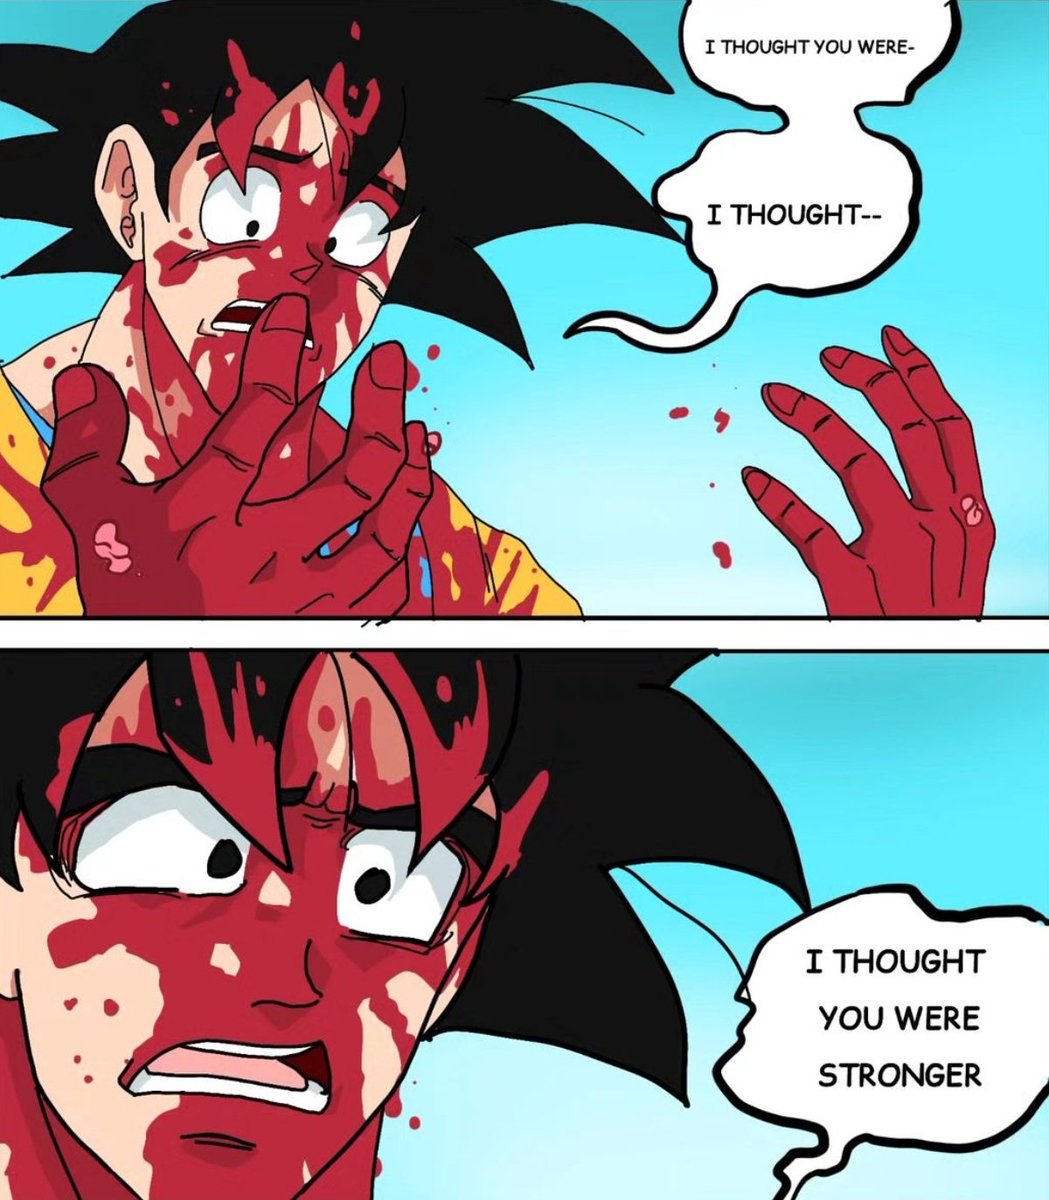 Goku after fighting with 90% of Anime characters